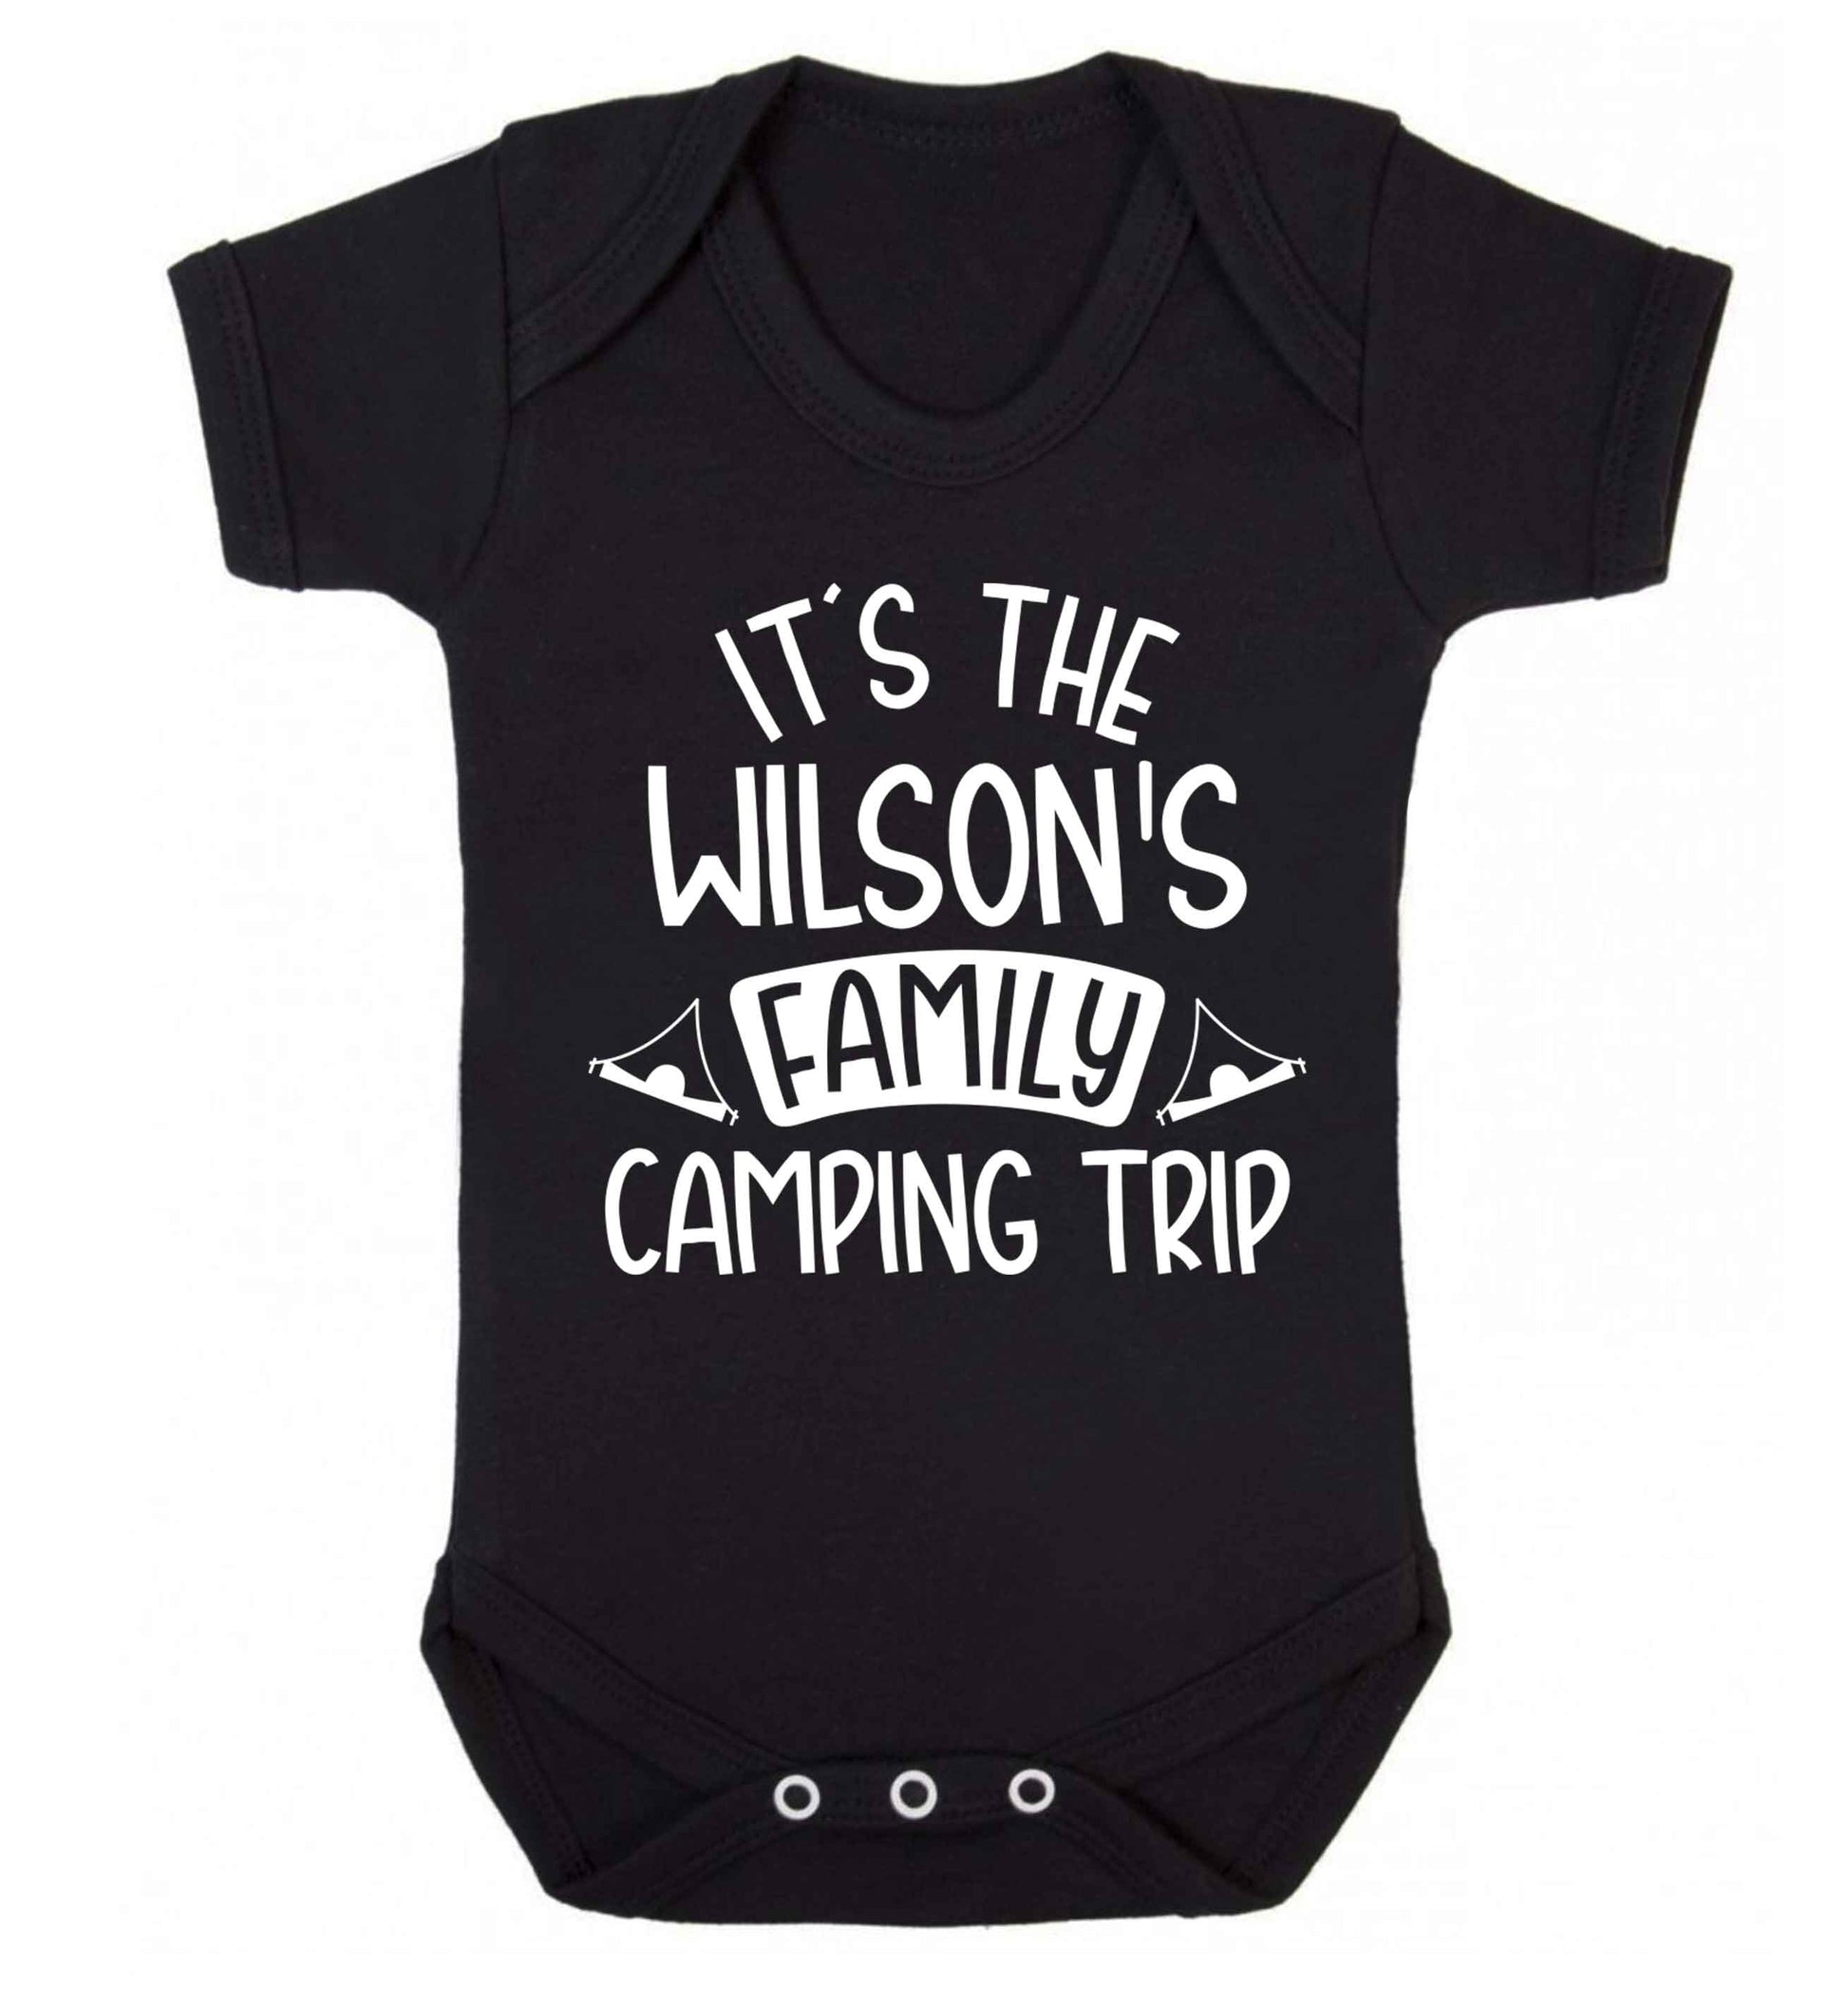 It's the Wilson's family camping trip personalised Baby Vest black 18-24 months